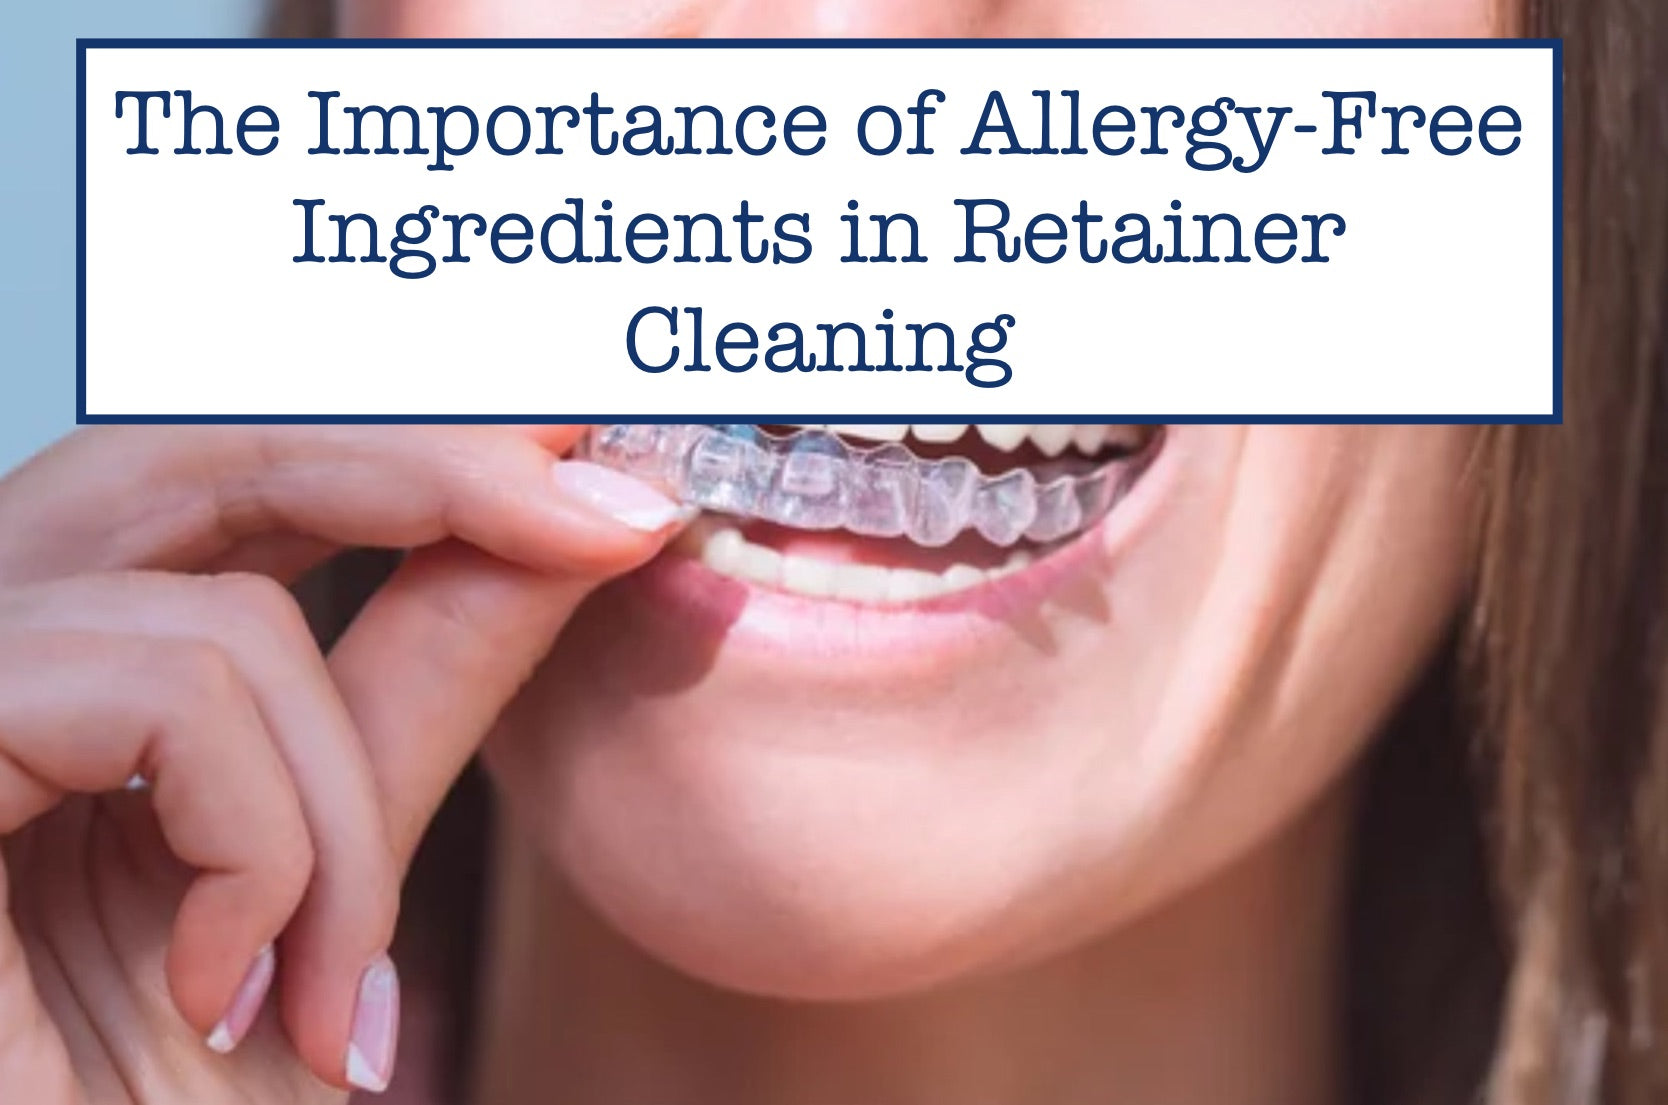 The Importance of Allergy-Free Ingredients in Retainer Cleaning